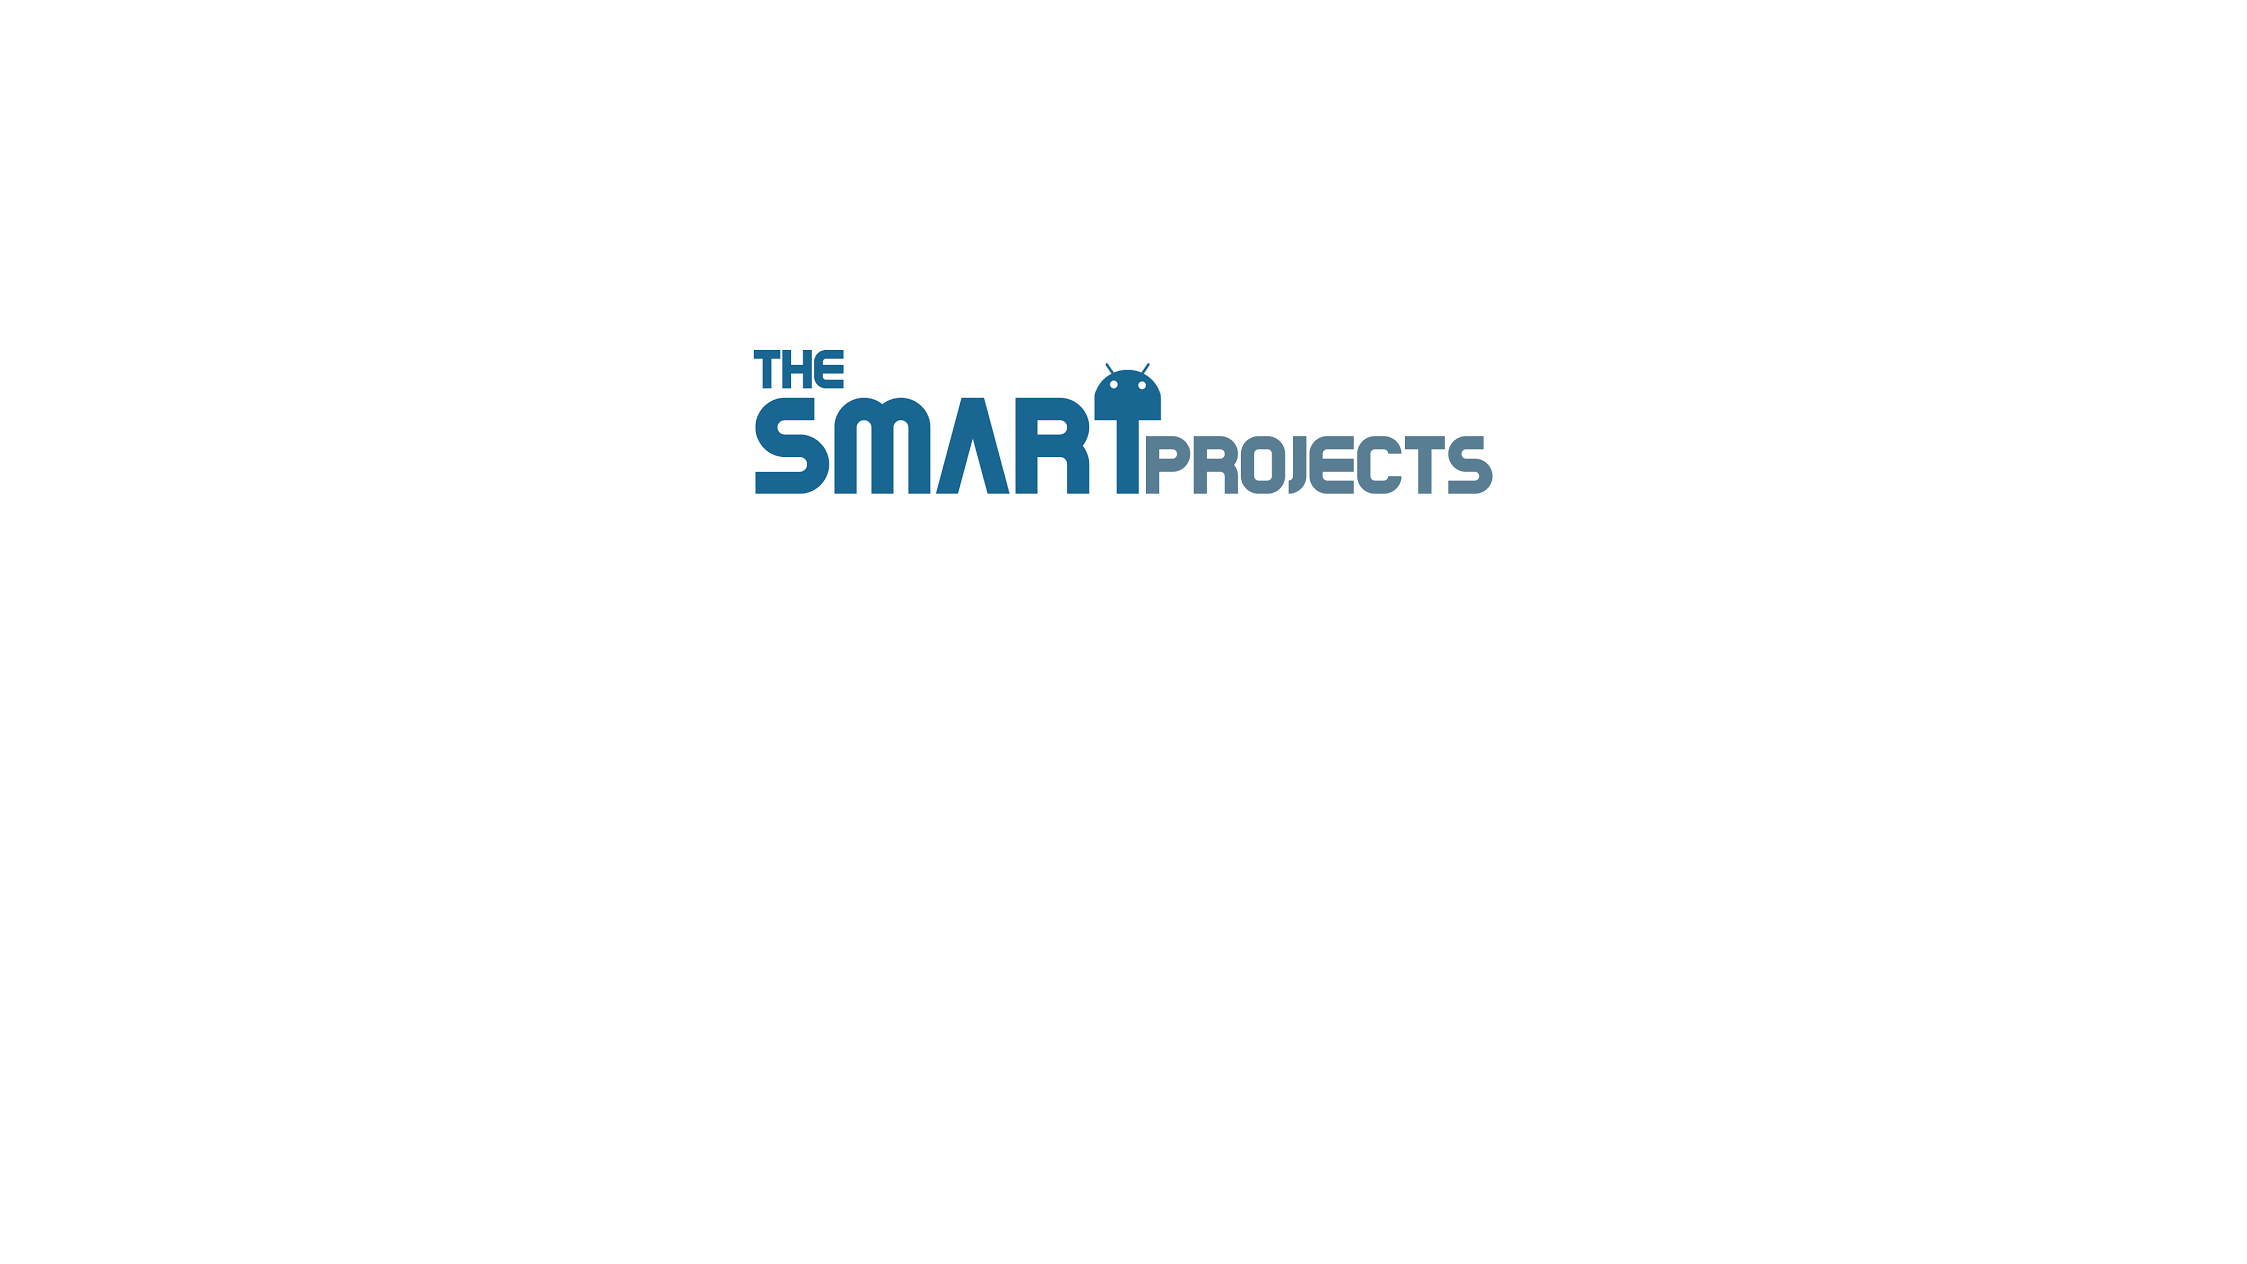 The Smart Projects